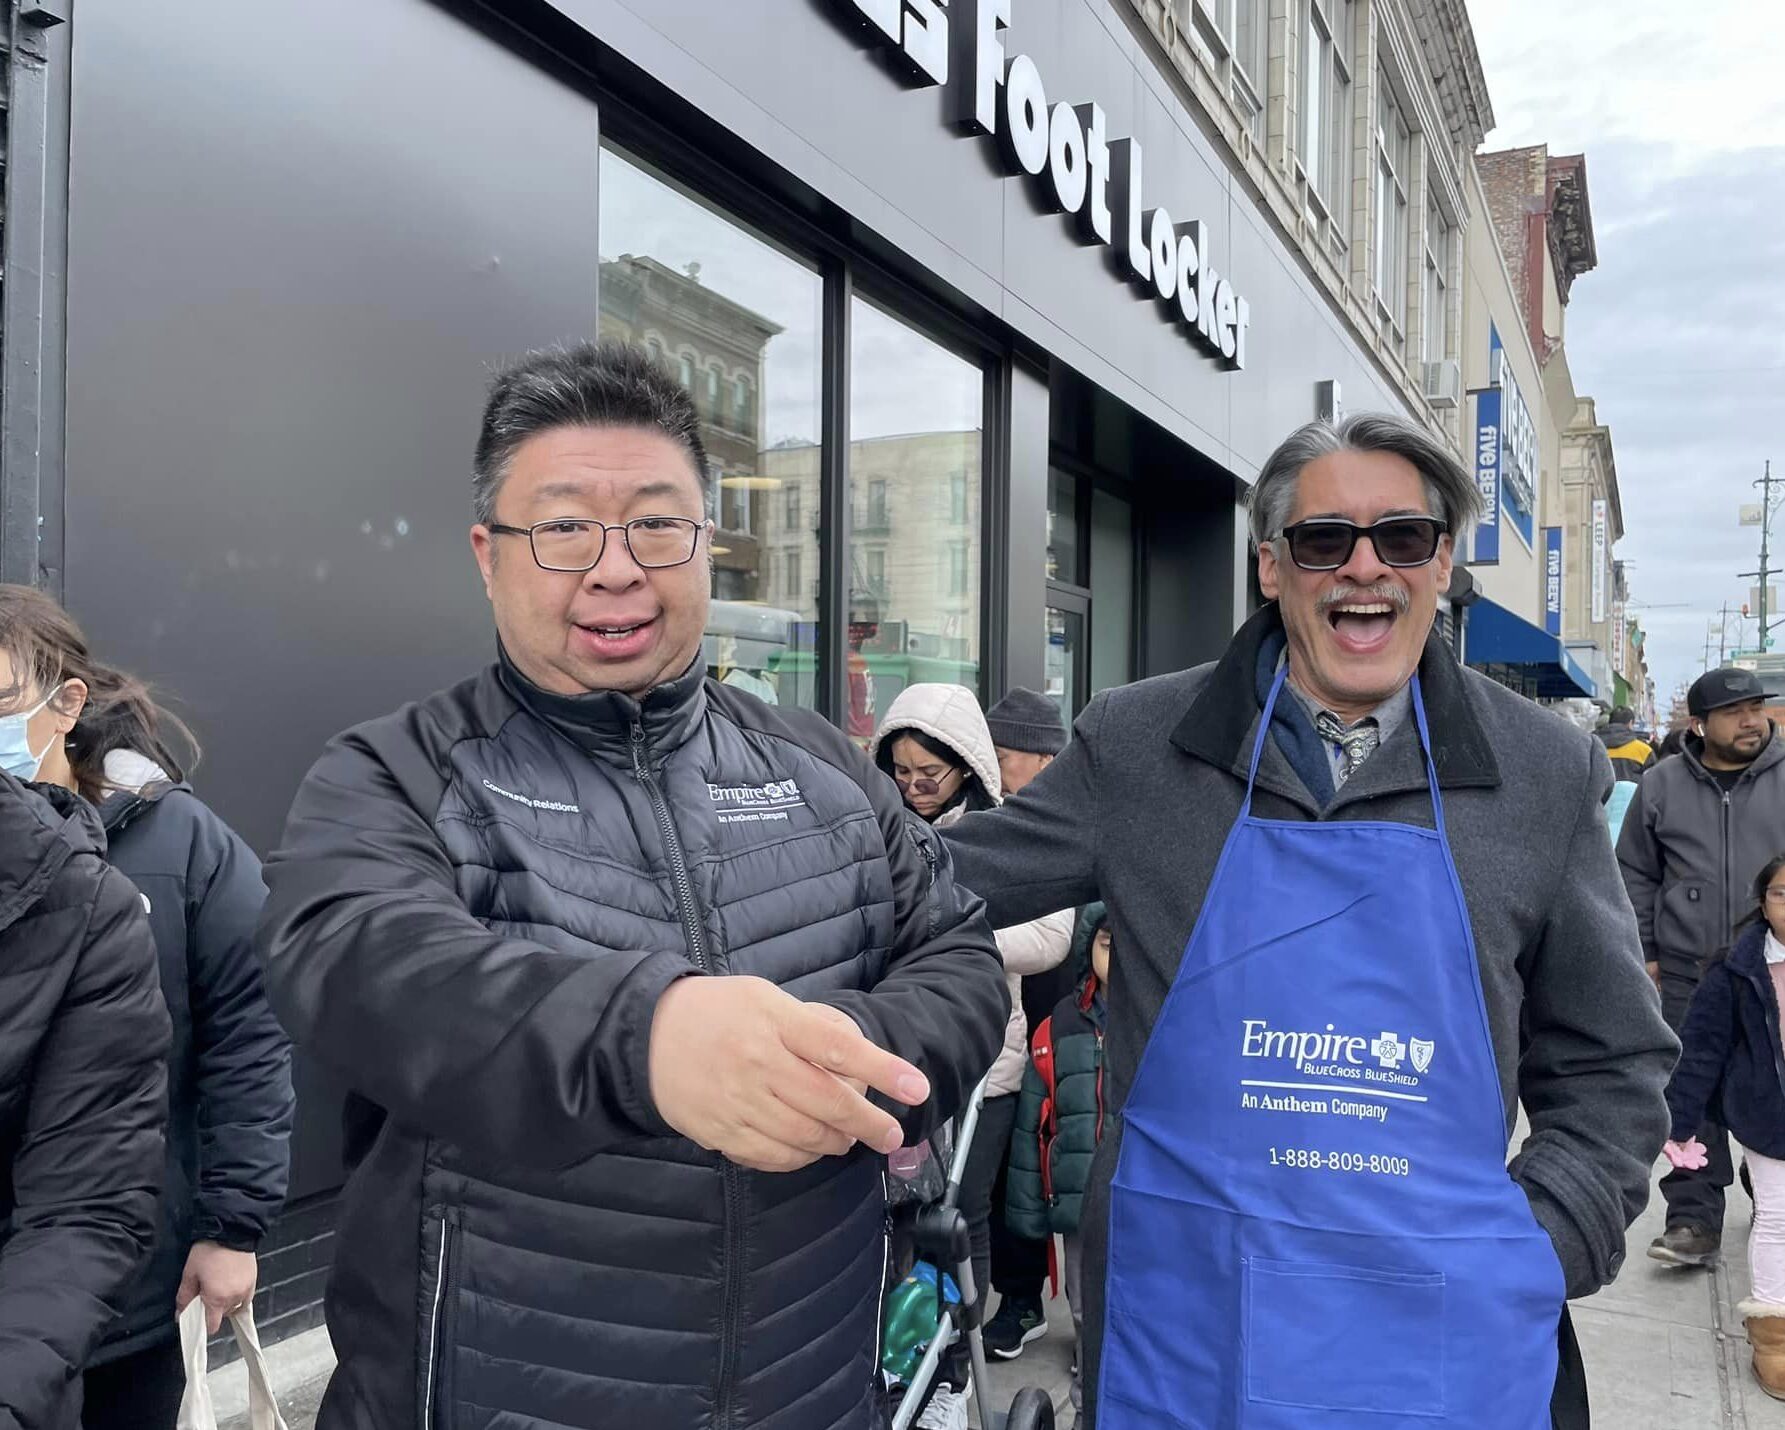 Two men, one wearing a black jacket and one in a blue apron, are smiling and gesturing animatedly on a busy street with people and storefronts in the background.